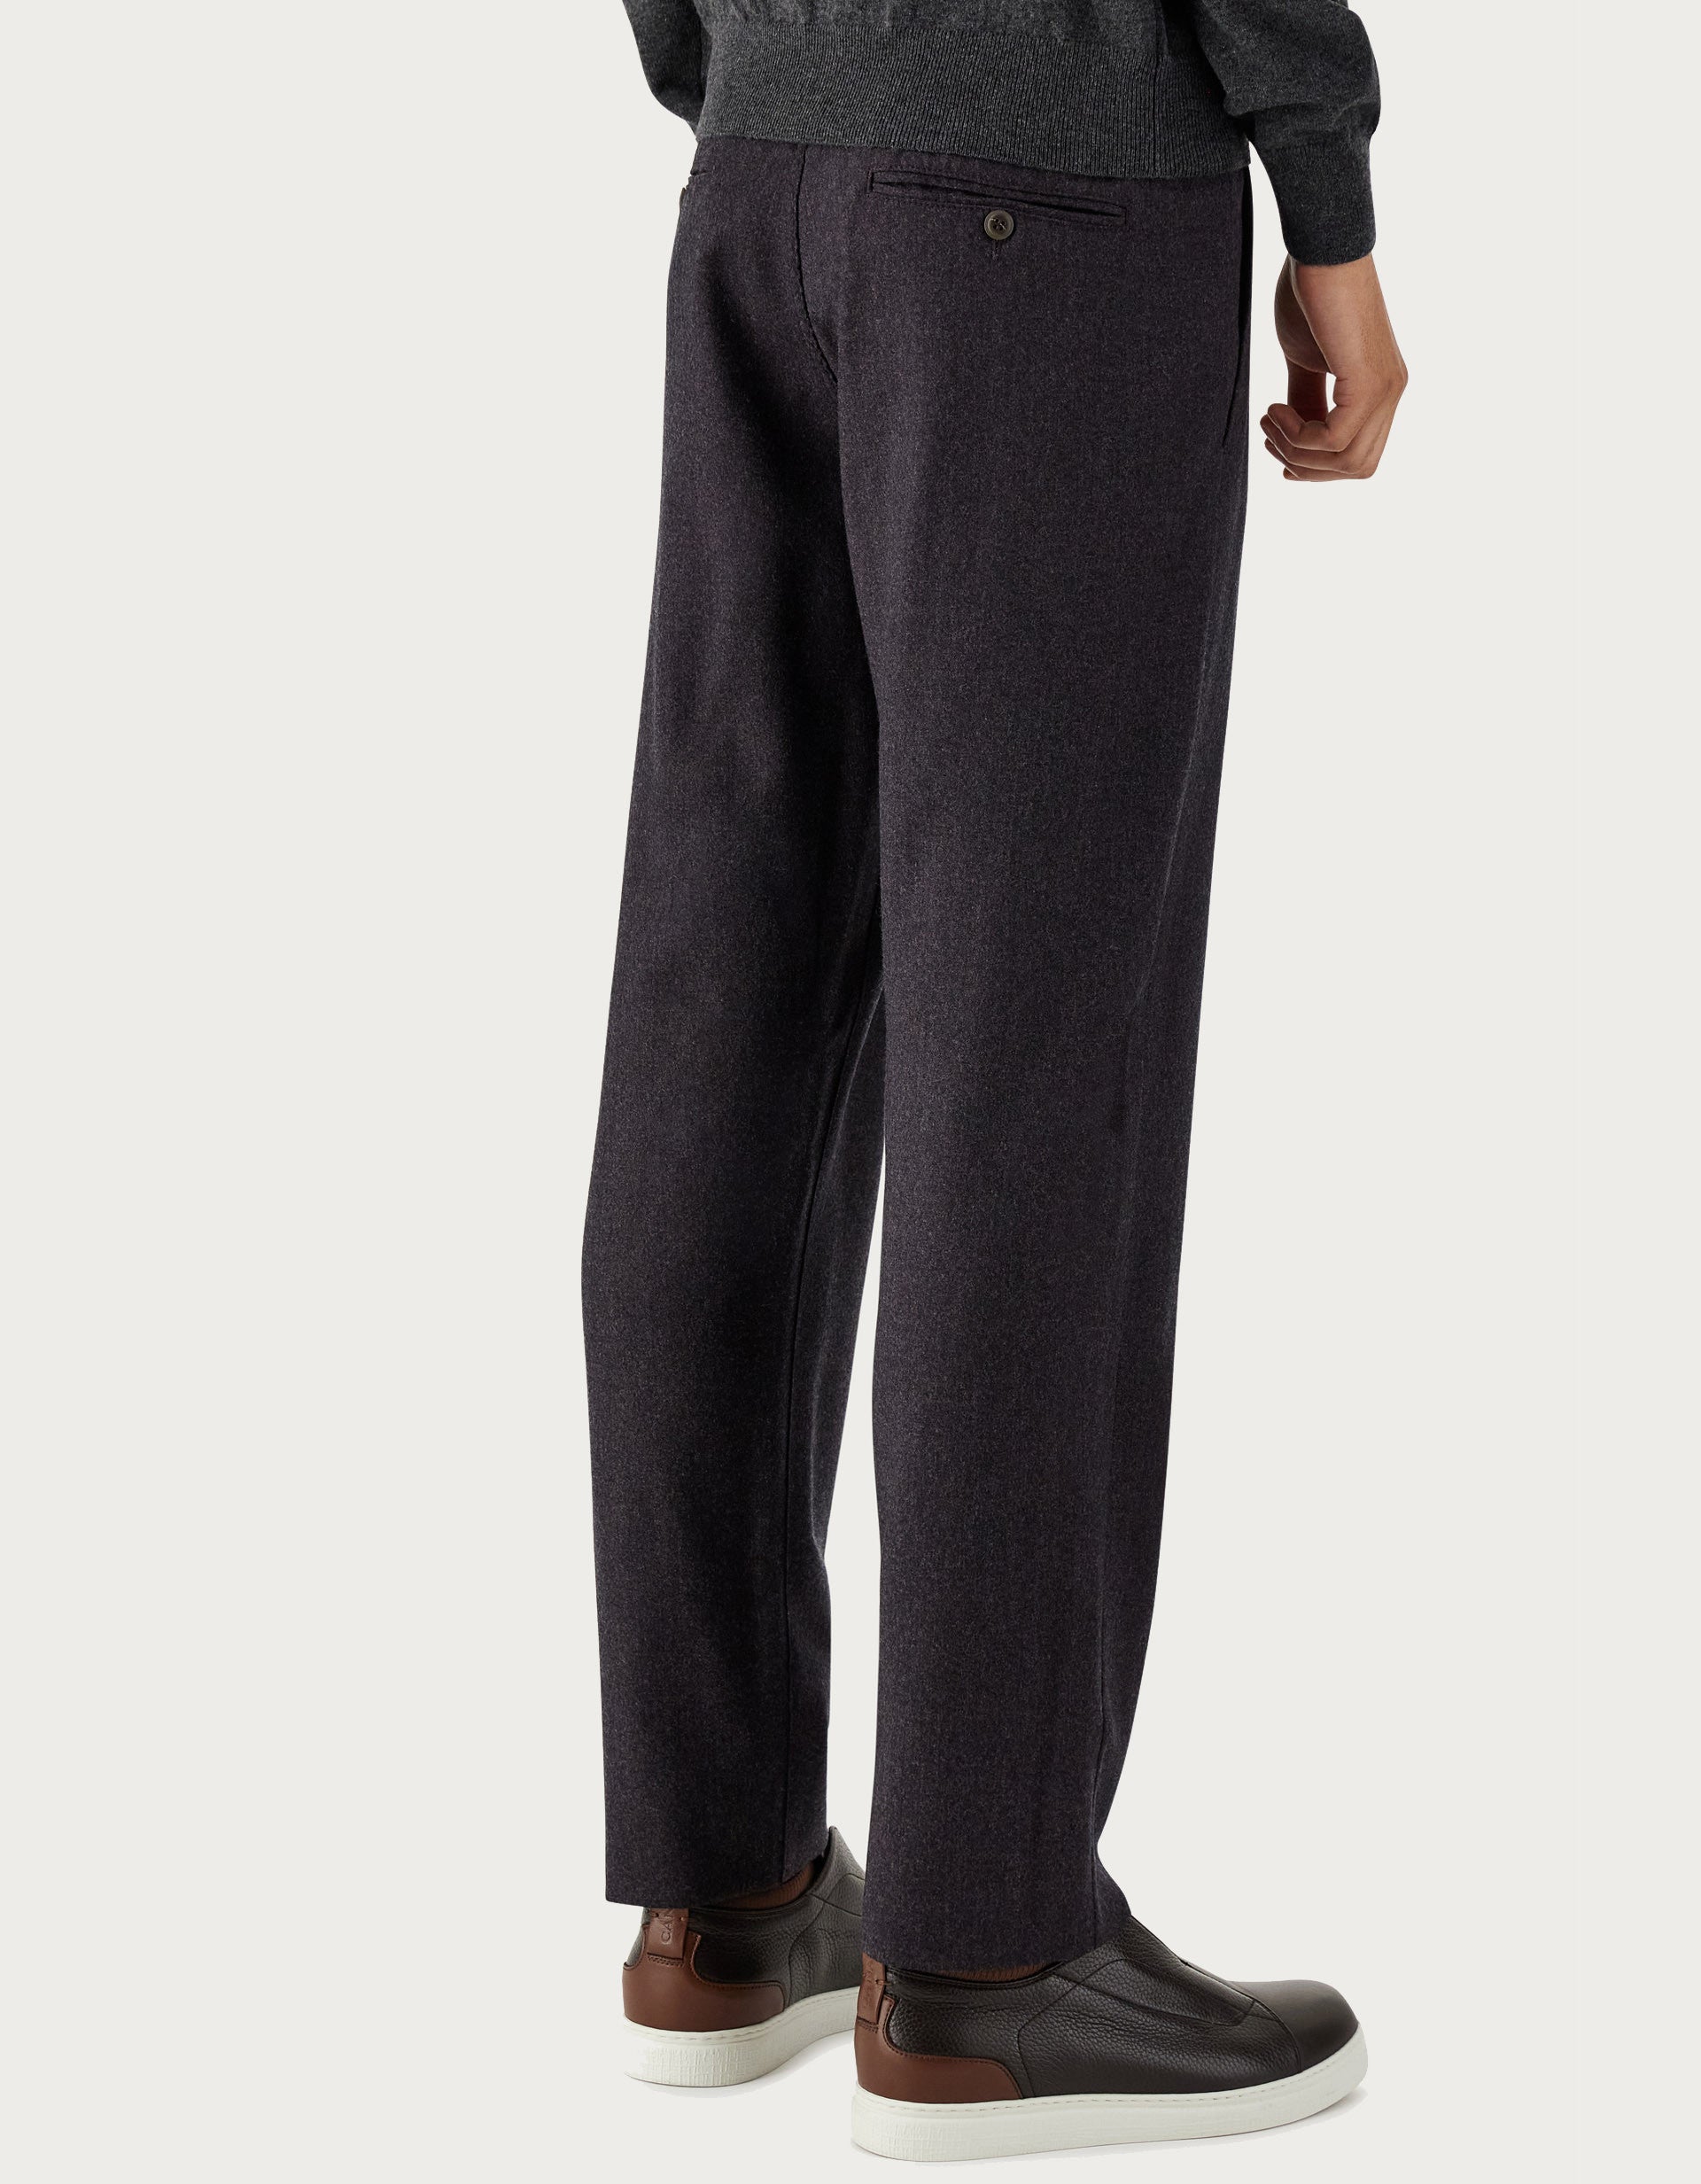 CANALI - Burgundy Impeccable Wool Smart Casual Trousers V1019-AR03472-901